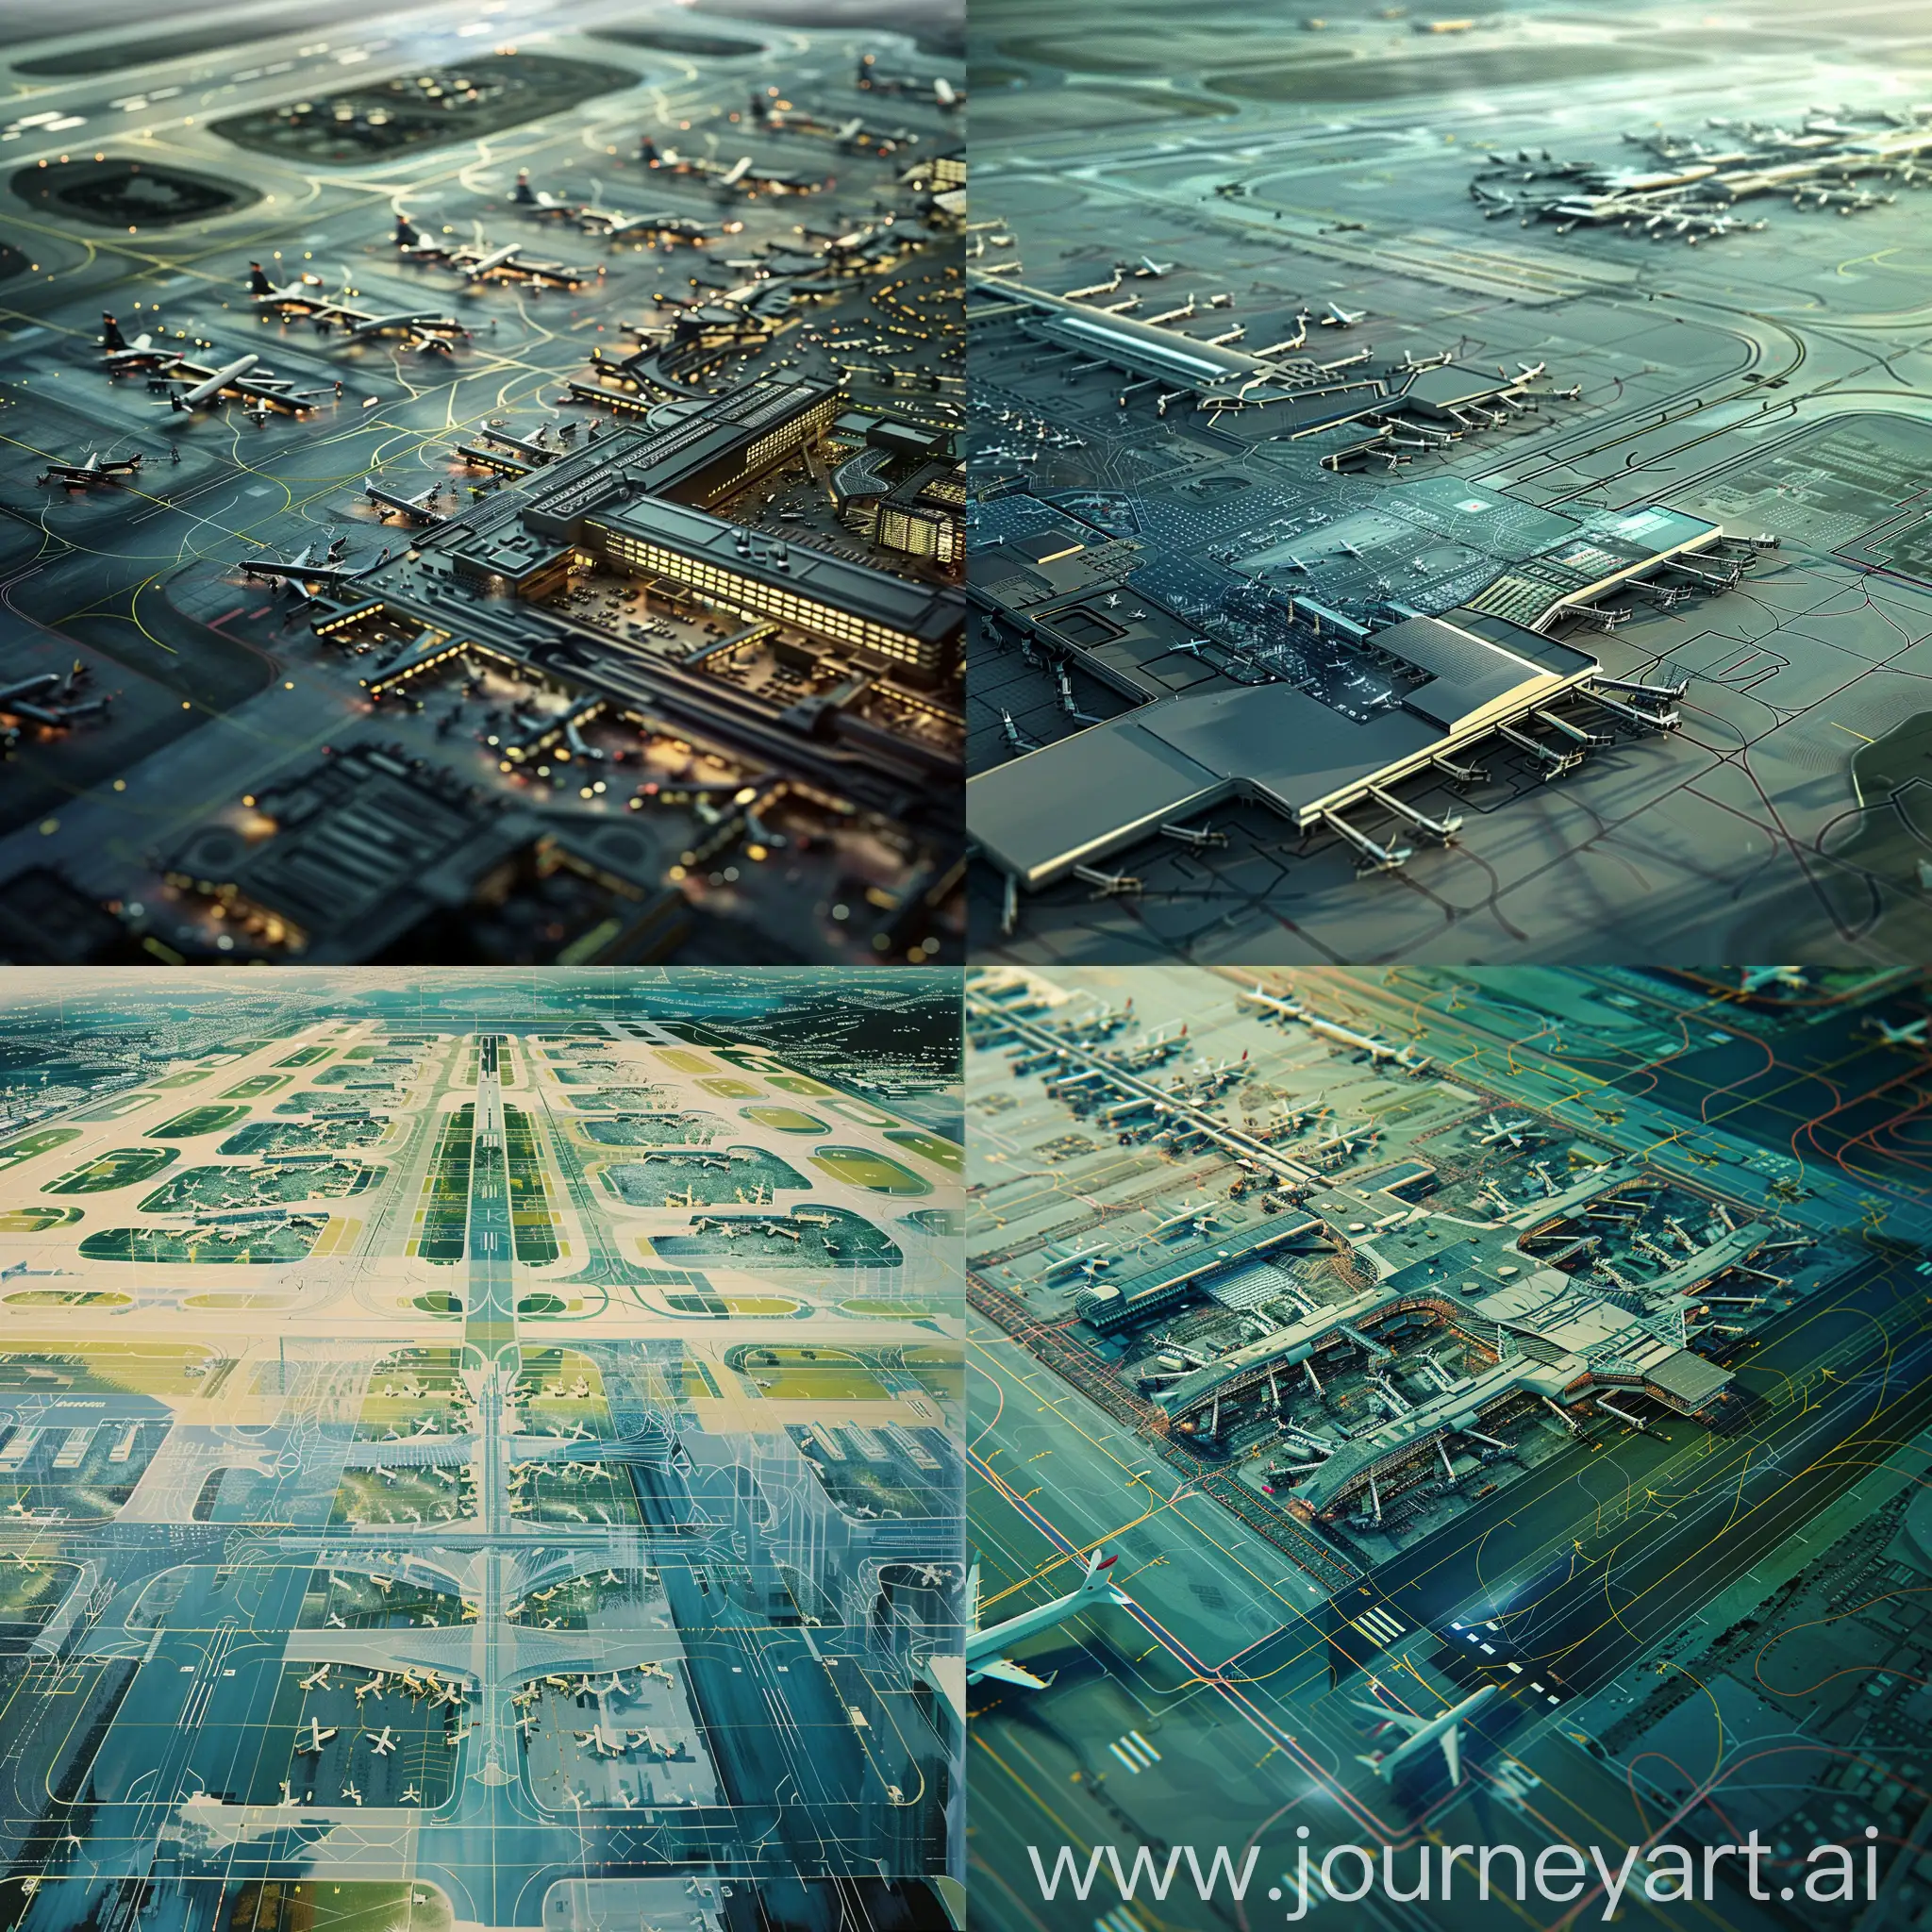 Contemporary-Airport-Aerial-View-with-Intricate-Network-of-Runways-and-Terminals